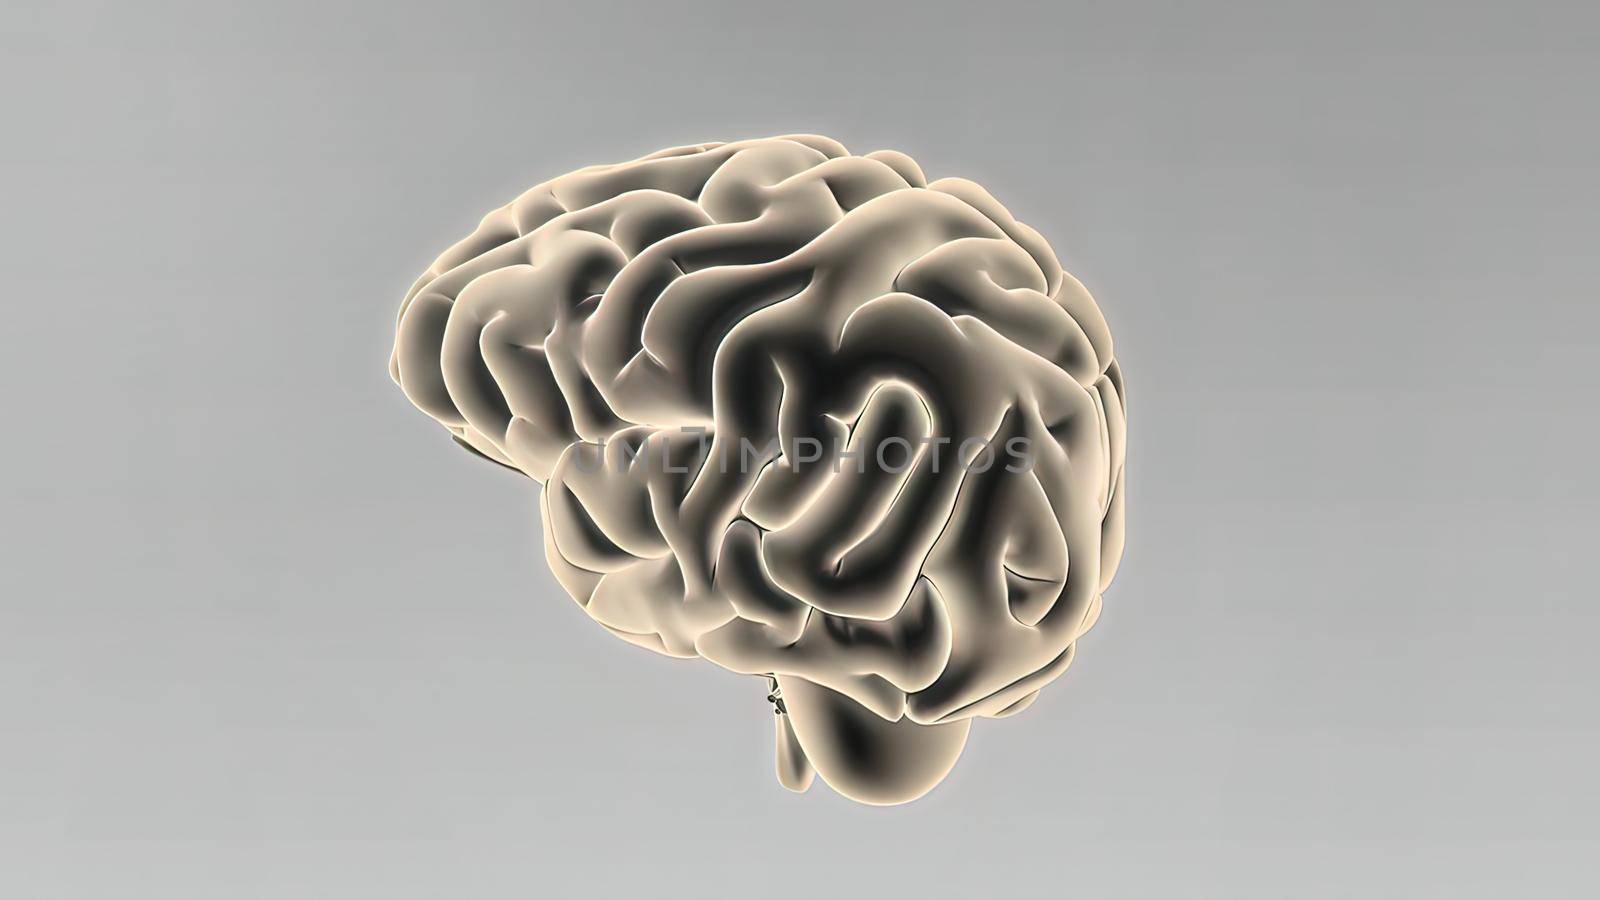 Medical 3D illustration of human brain by creativepic